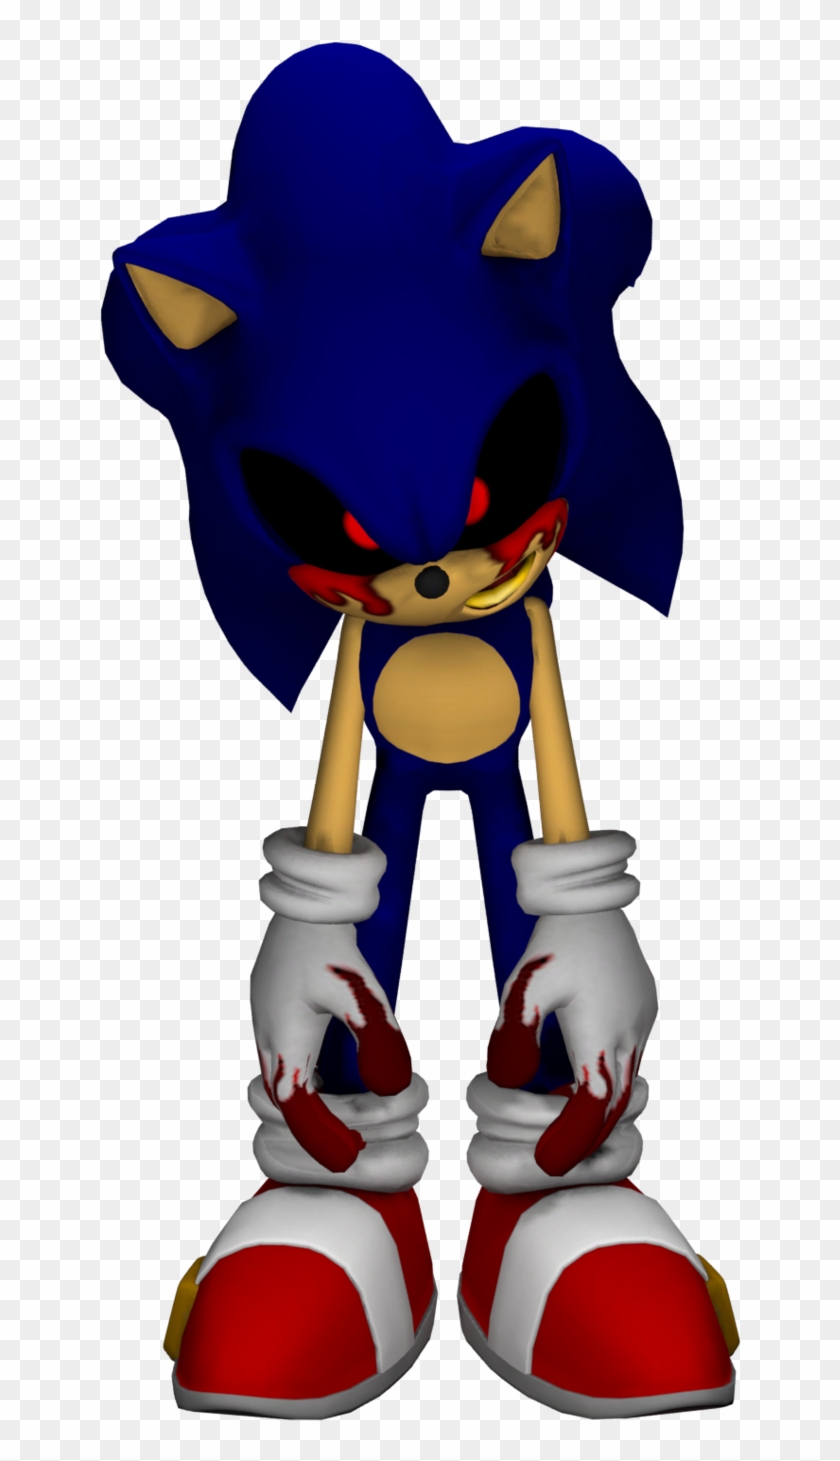 New Sonic Exe Model By Foxmaster55-d9jri5r - Sonic Exe Png #826146